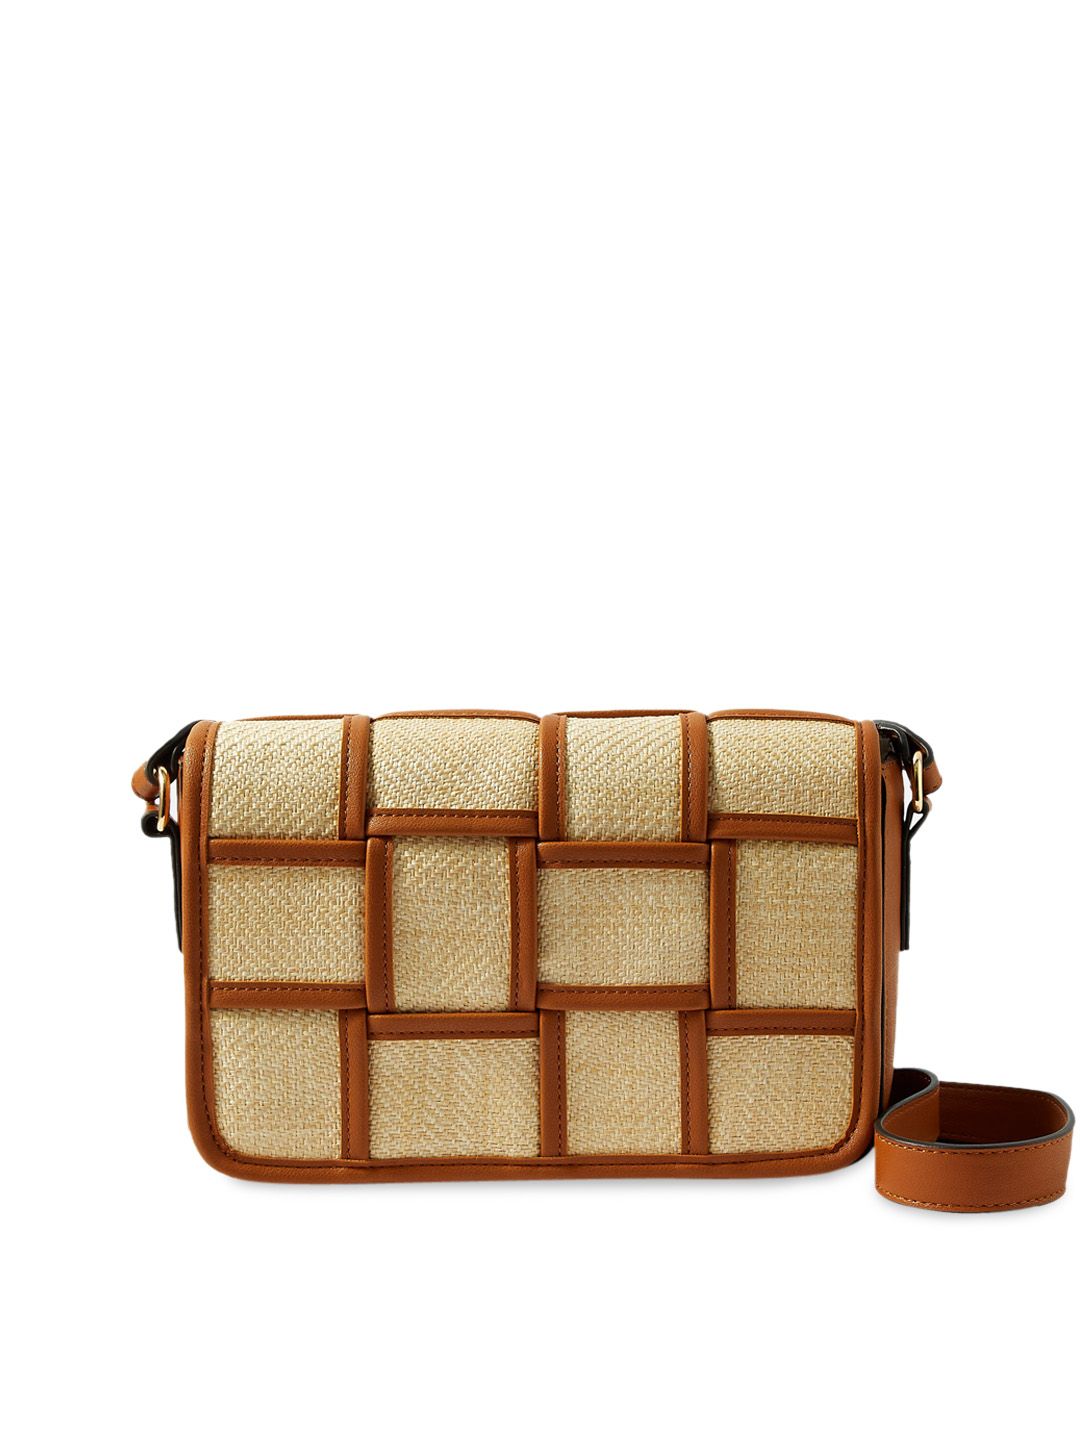 Accessorize Tan Checked Structured Sling Bag Price in India